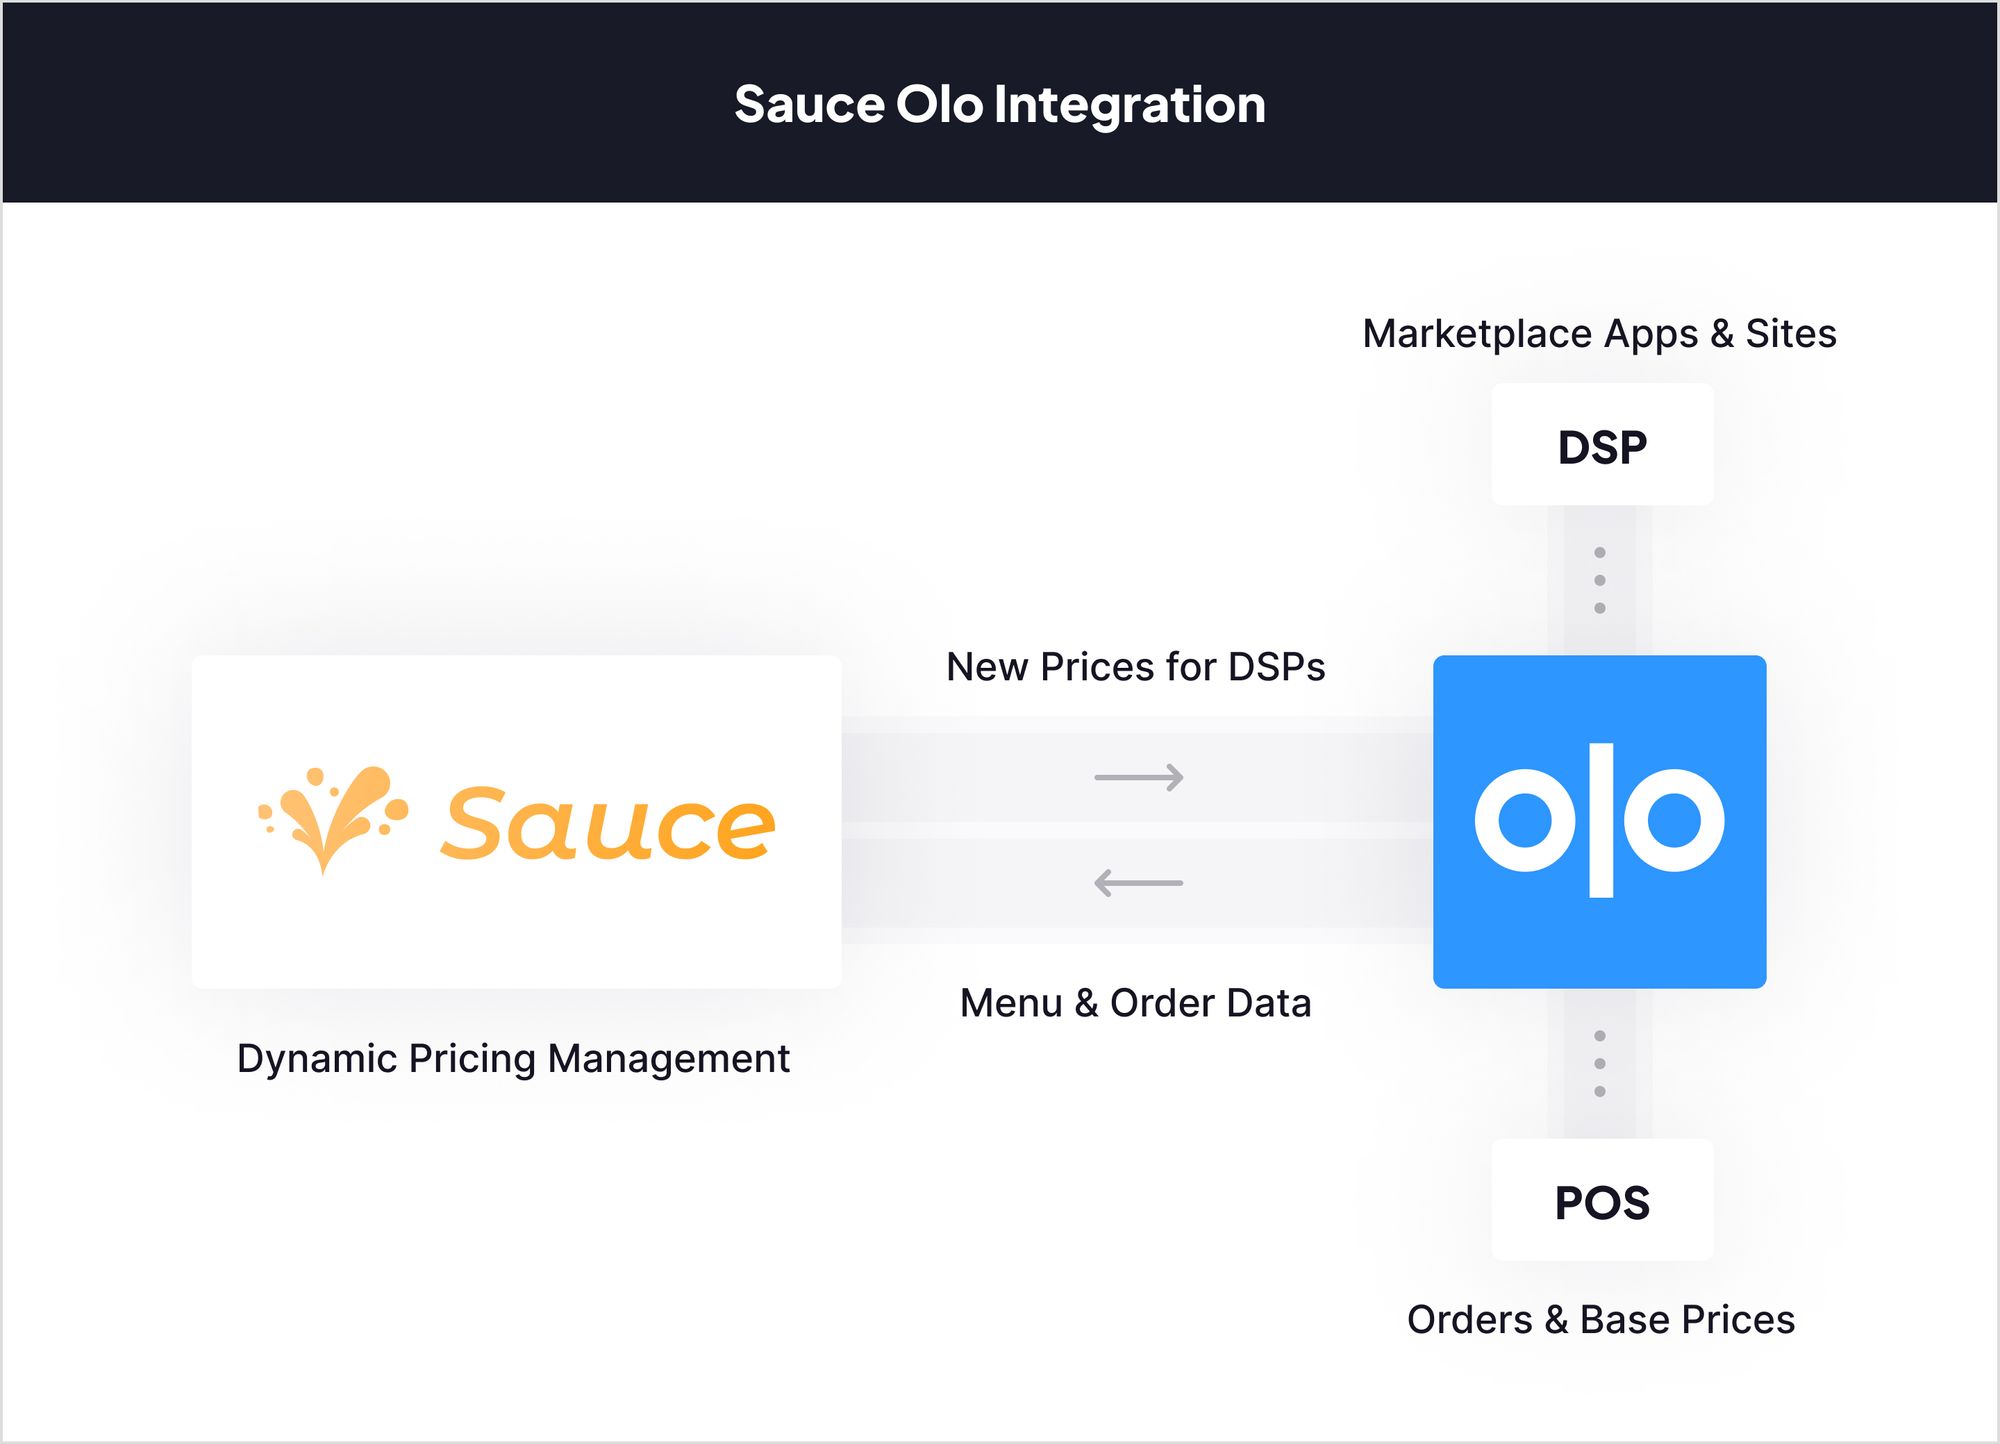 Announcing Sauce’s Integration with Olo as a Gold Connect Partner